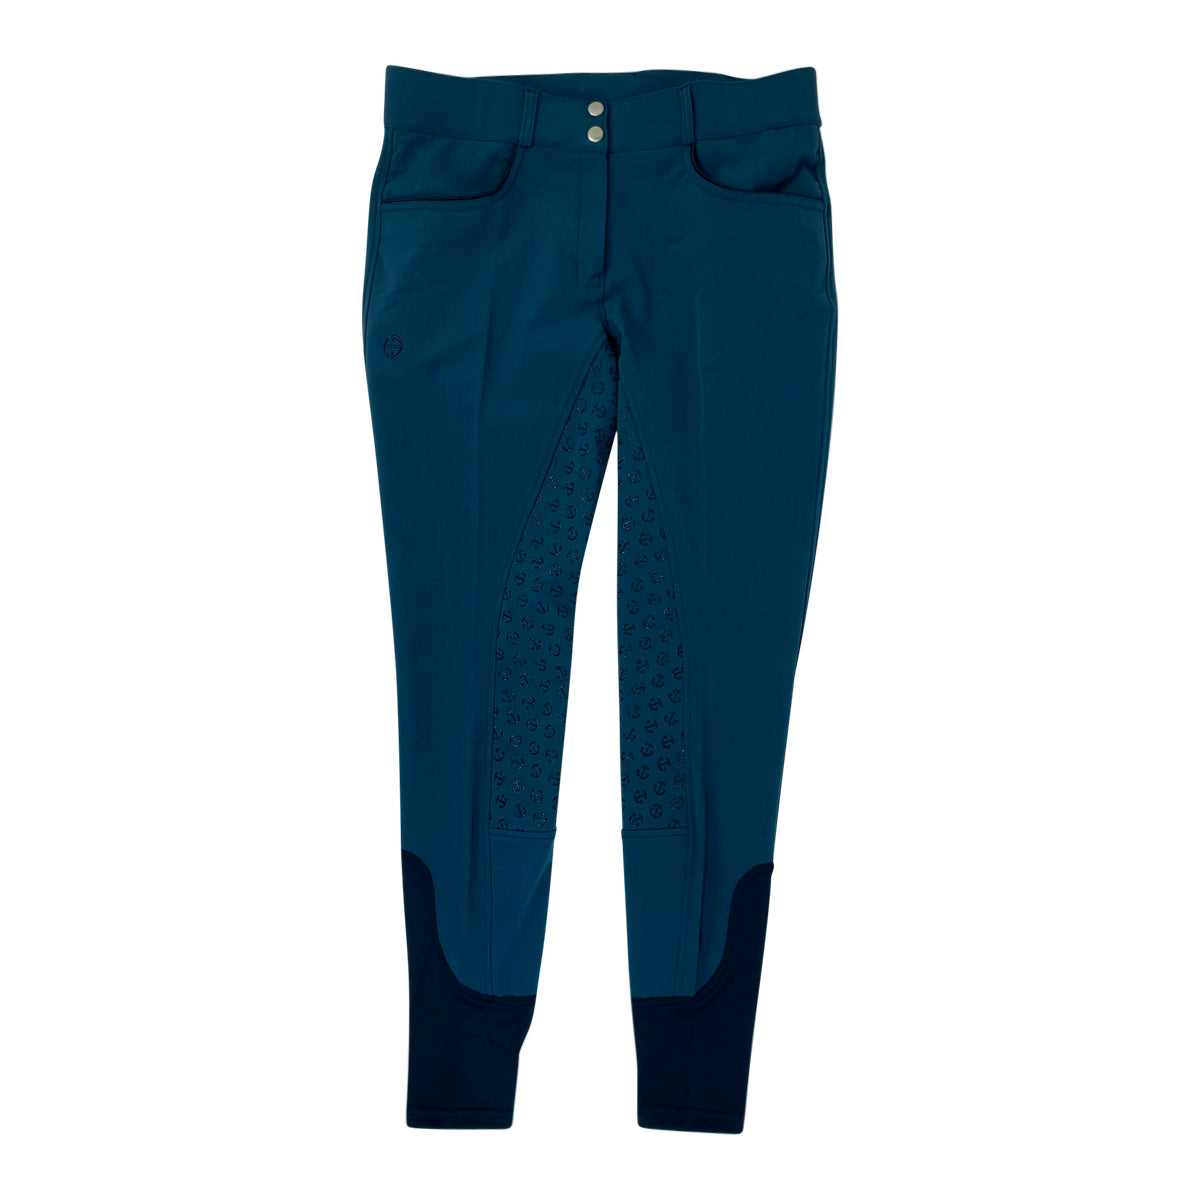 Halter Ego 'Perfection' Full Seat Breeches in Ocean Blue